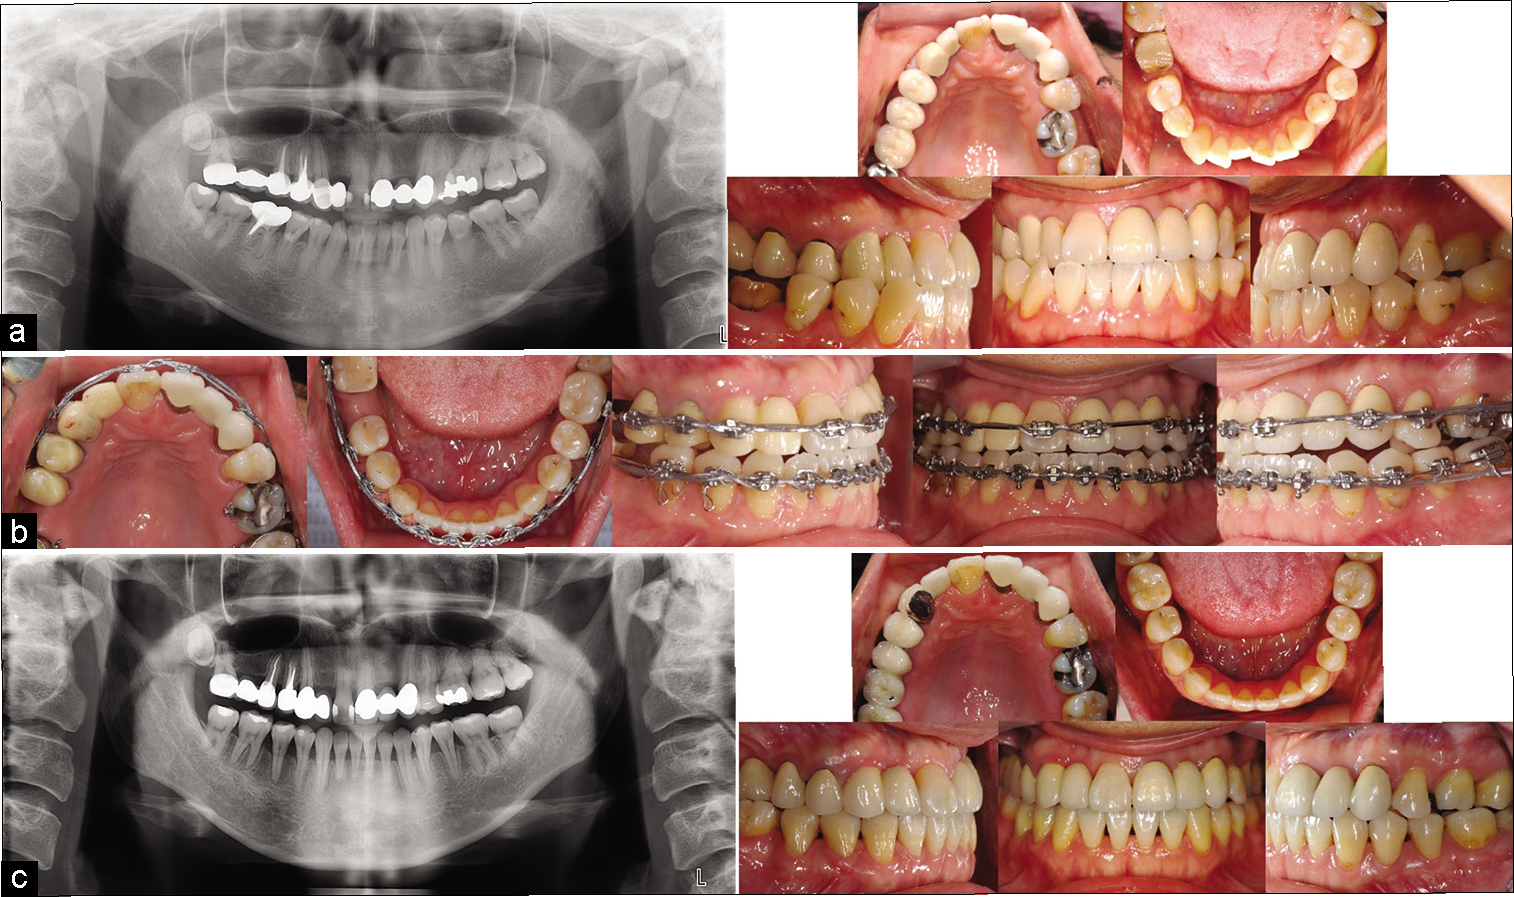 Case 2: (a) Initial records; (b) Mid-treatment records, metal brackets (Ormco, CA, USA) with 0.018-in slots for the anterior teeth and 0.022-in slots for the posterior teeth. The initial wires were 0.016-in NiTi and 0.016 × 0.022-in NiTi, the working wire was 0.016 × 0.022- in SS, and the finishing wire was 0.017 × 0.025-in TMA; (c) Post-treatment records.